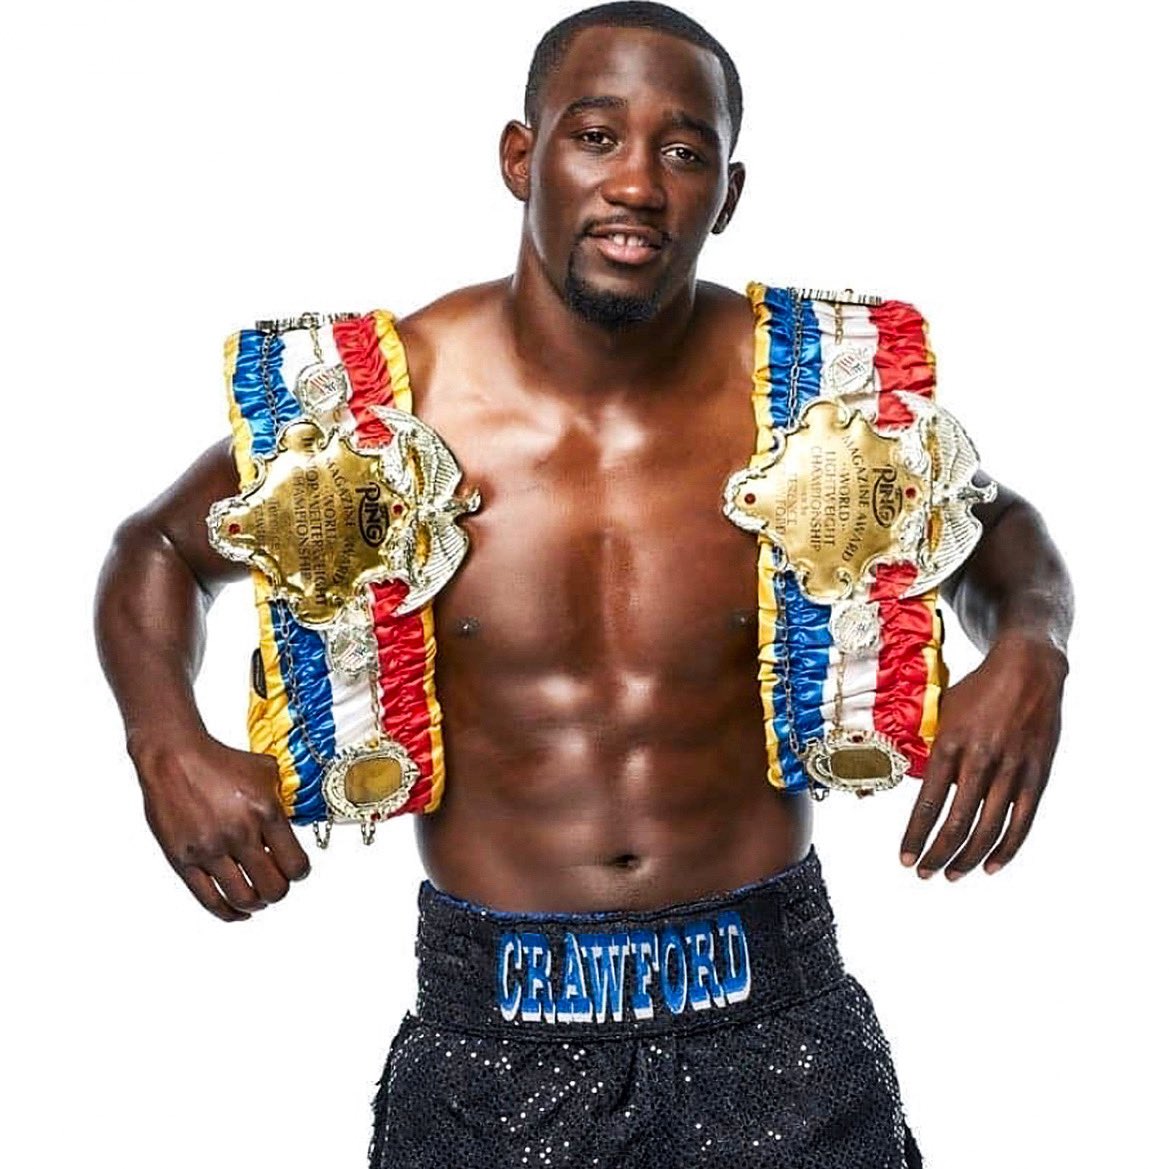 Crawford: "my goal is to remind the world I am the best fighter on the planet"